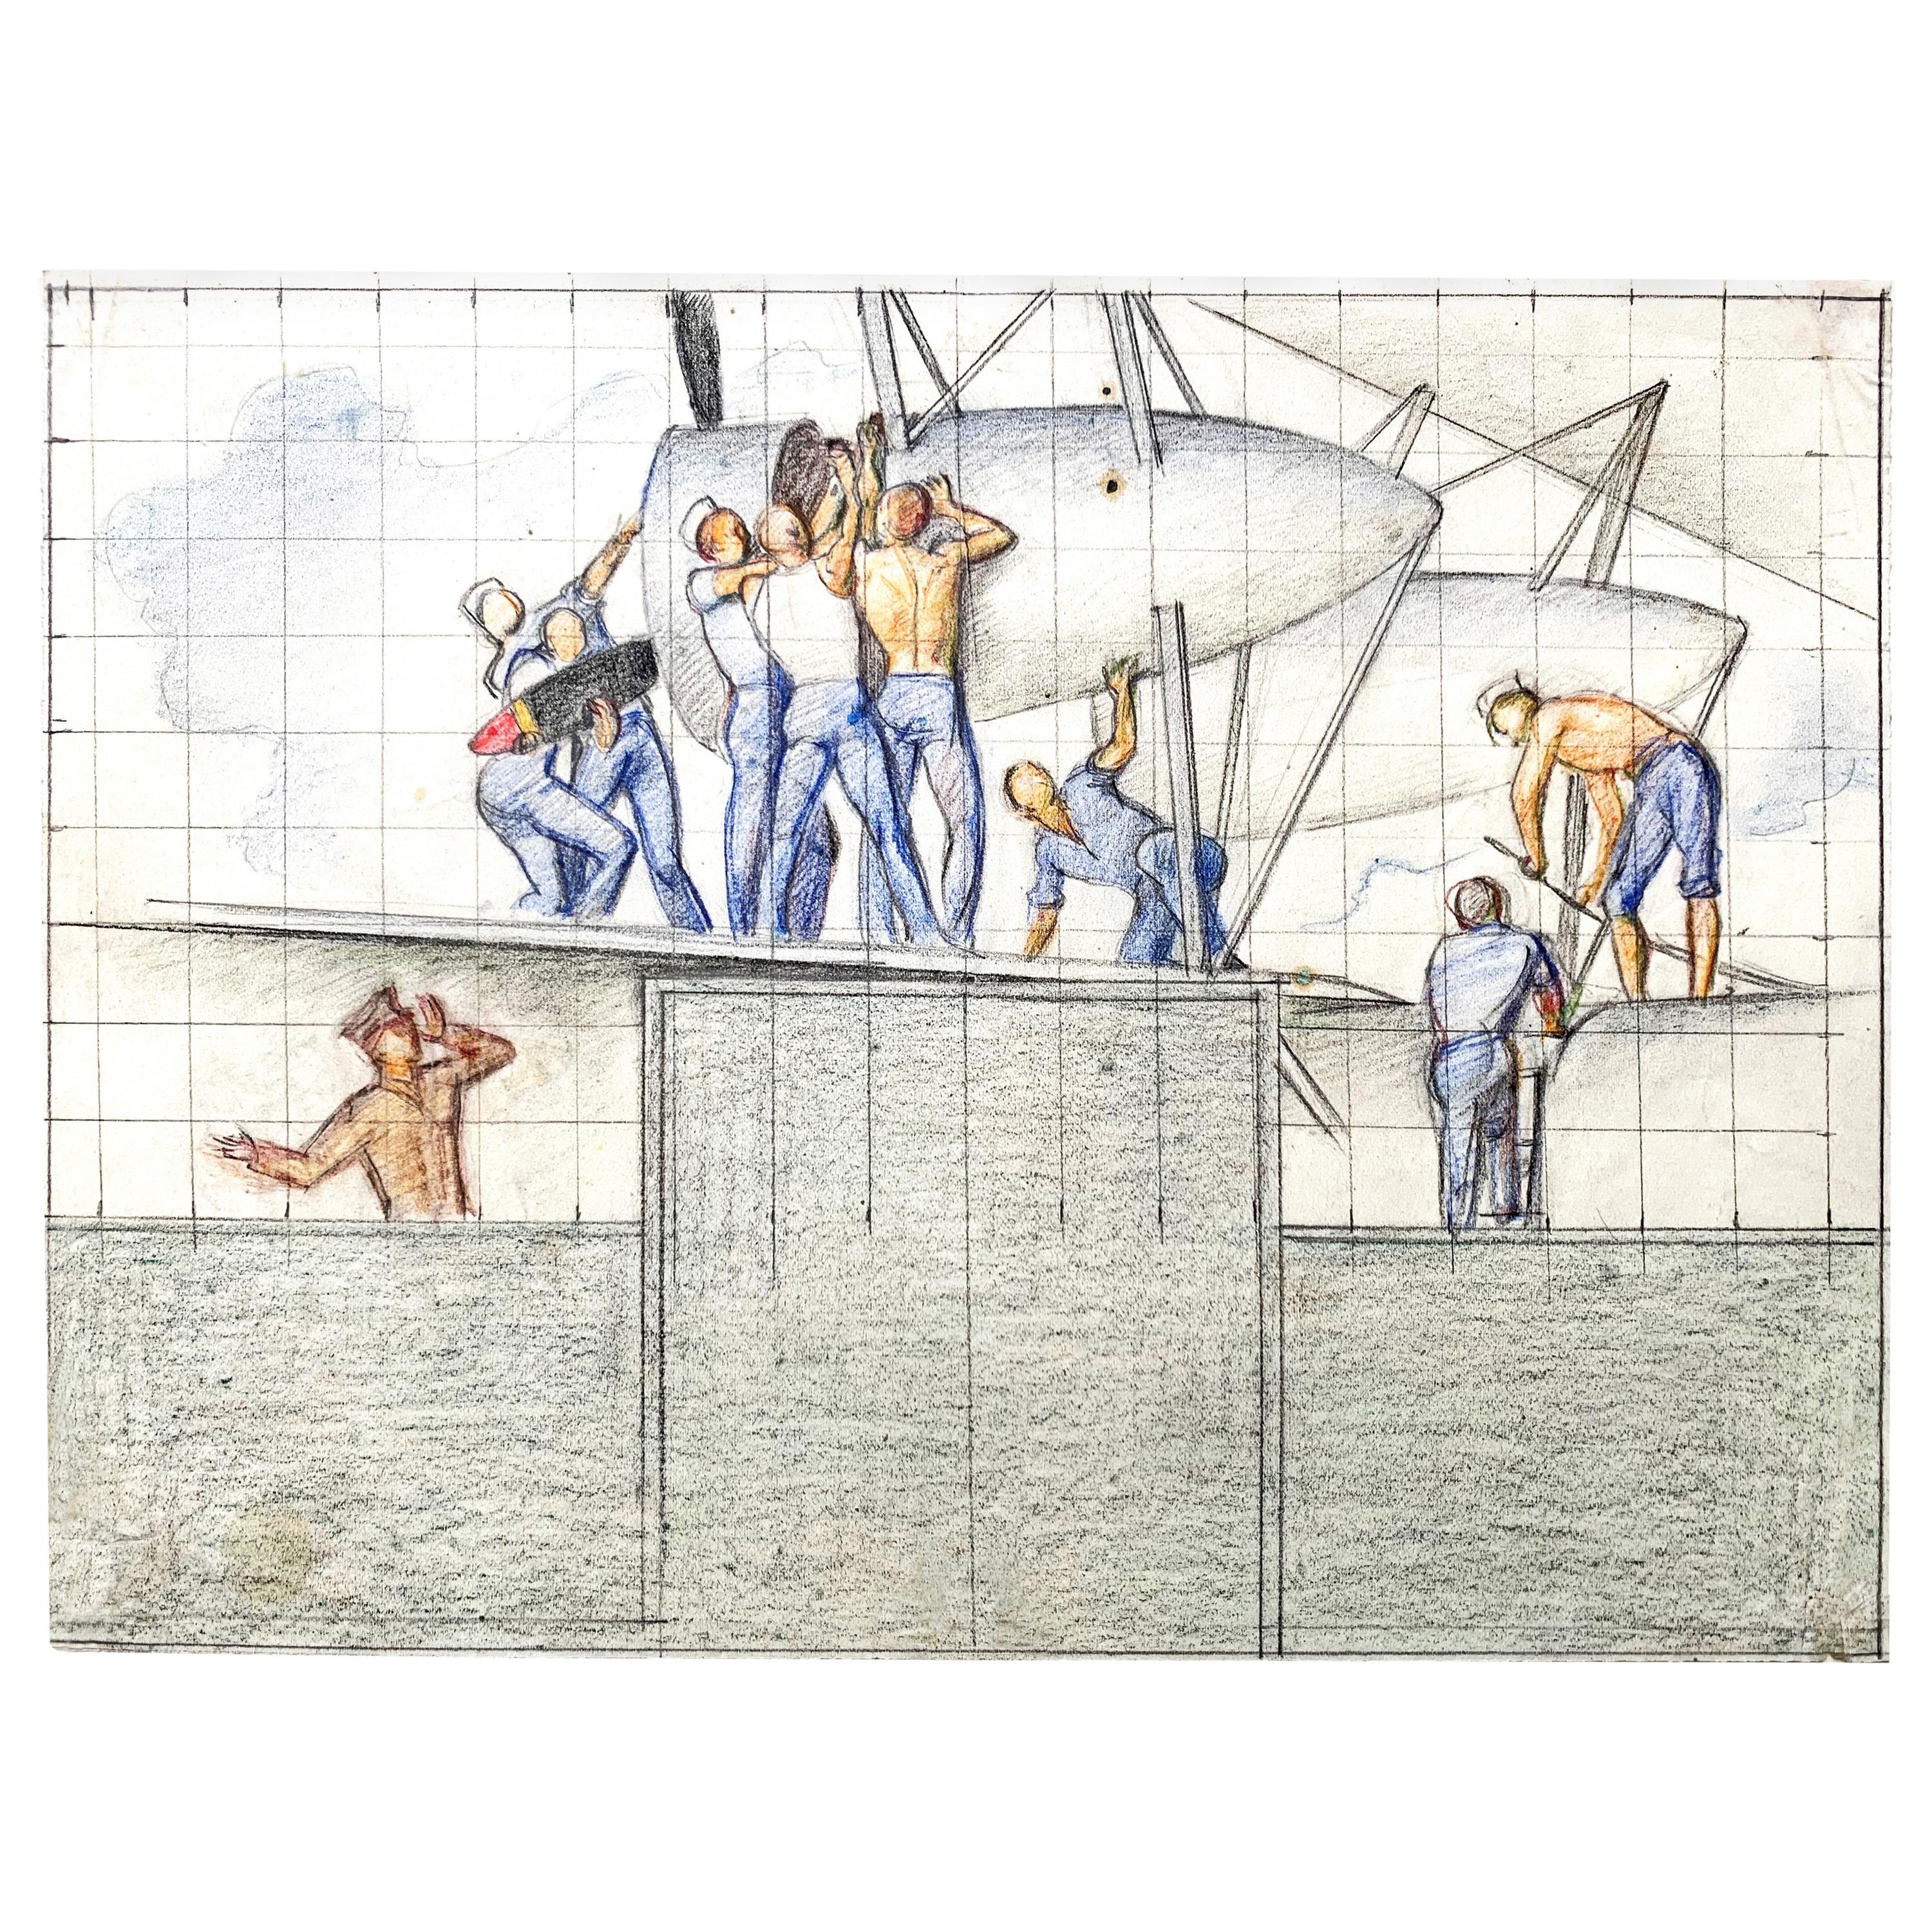 "Ship Building, " 1930s Era WPA Mural Study with Sailors by Allyn COX